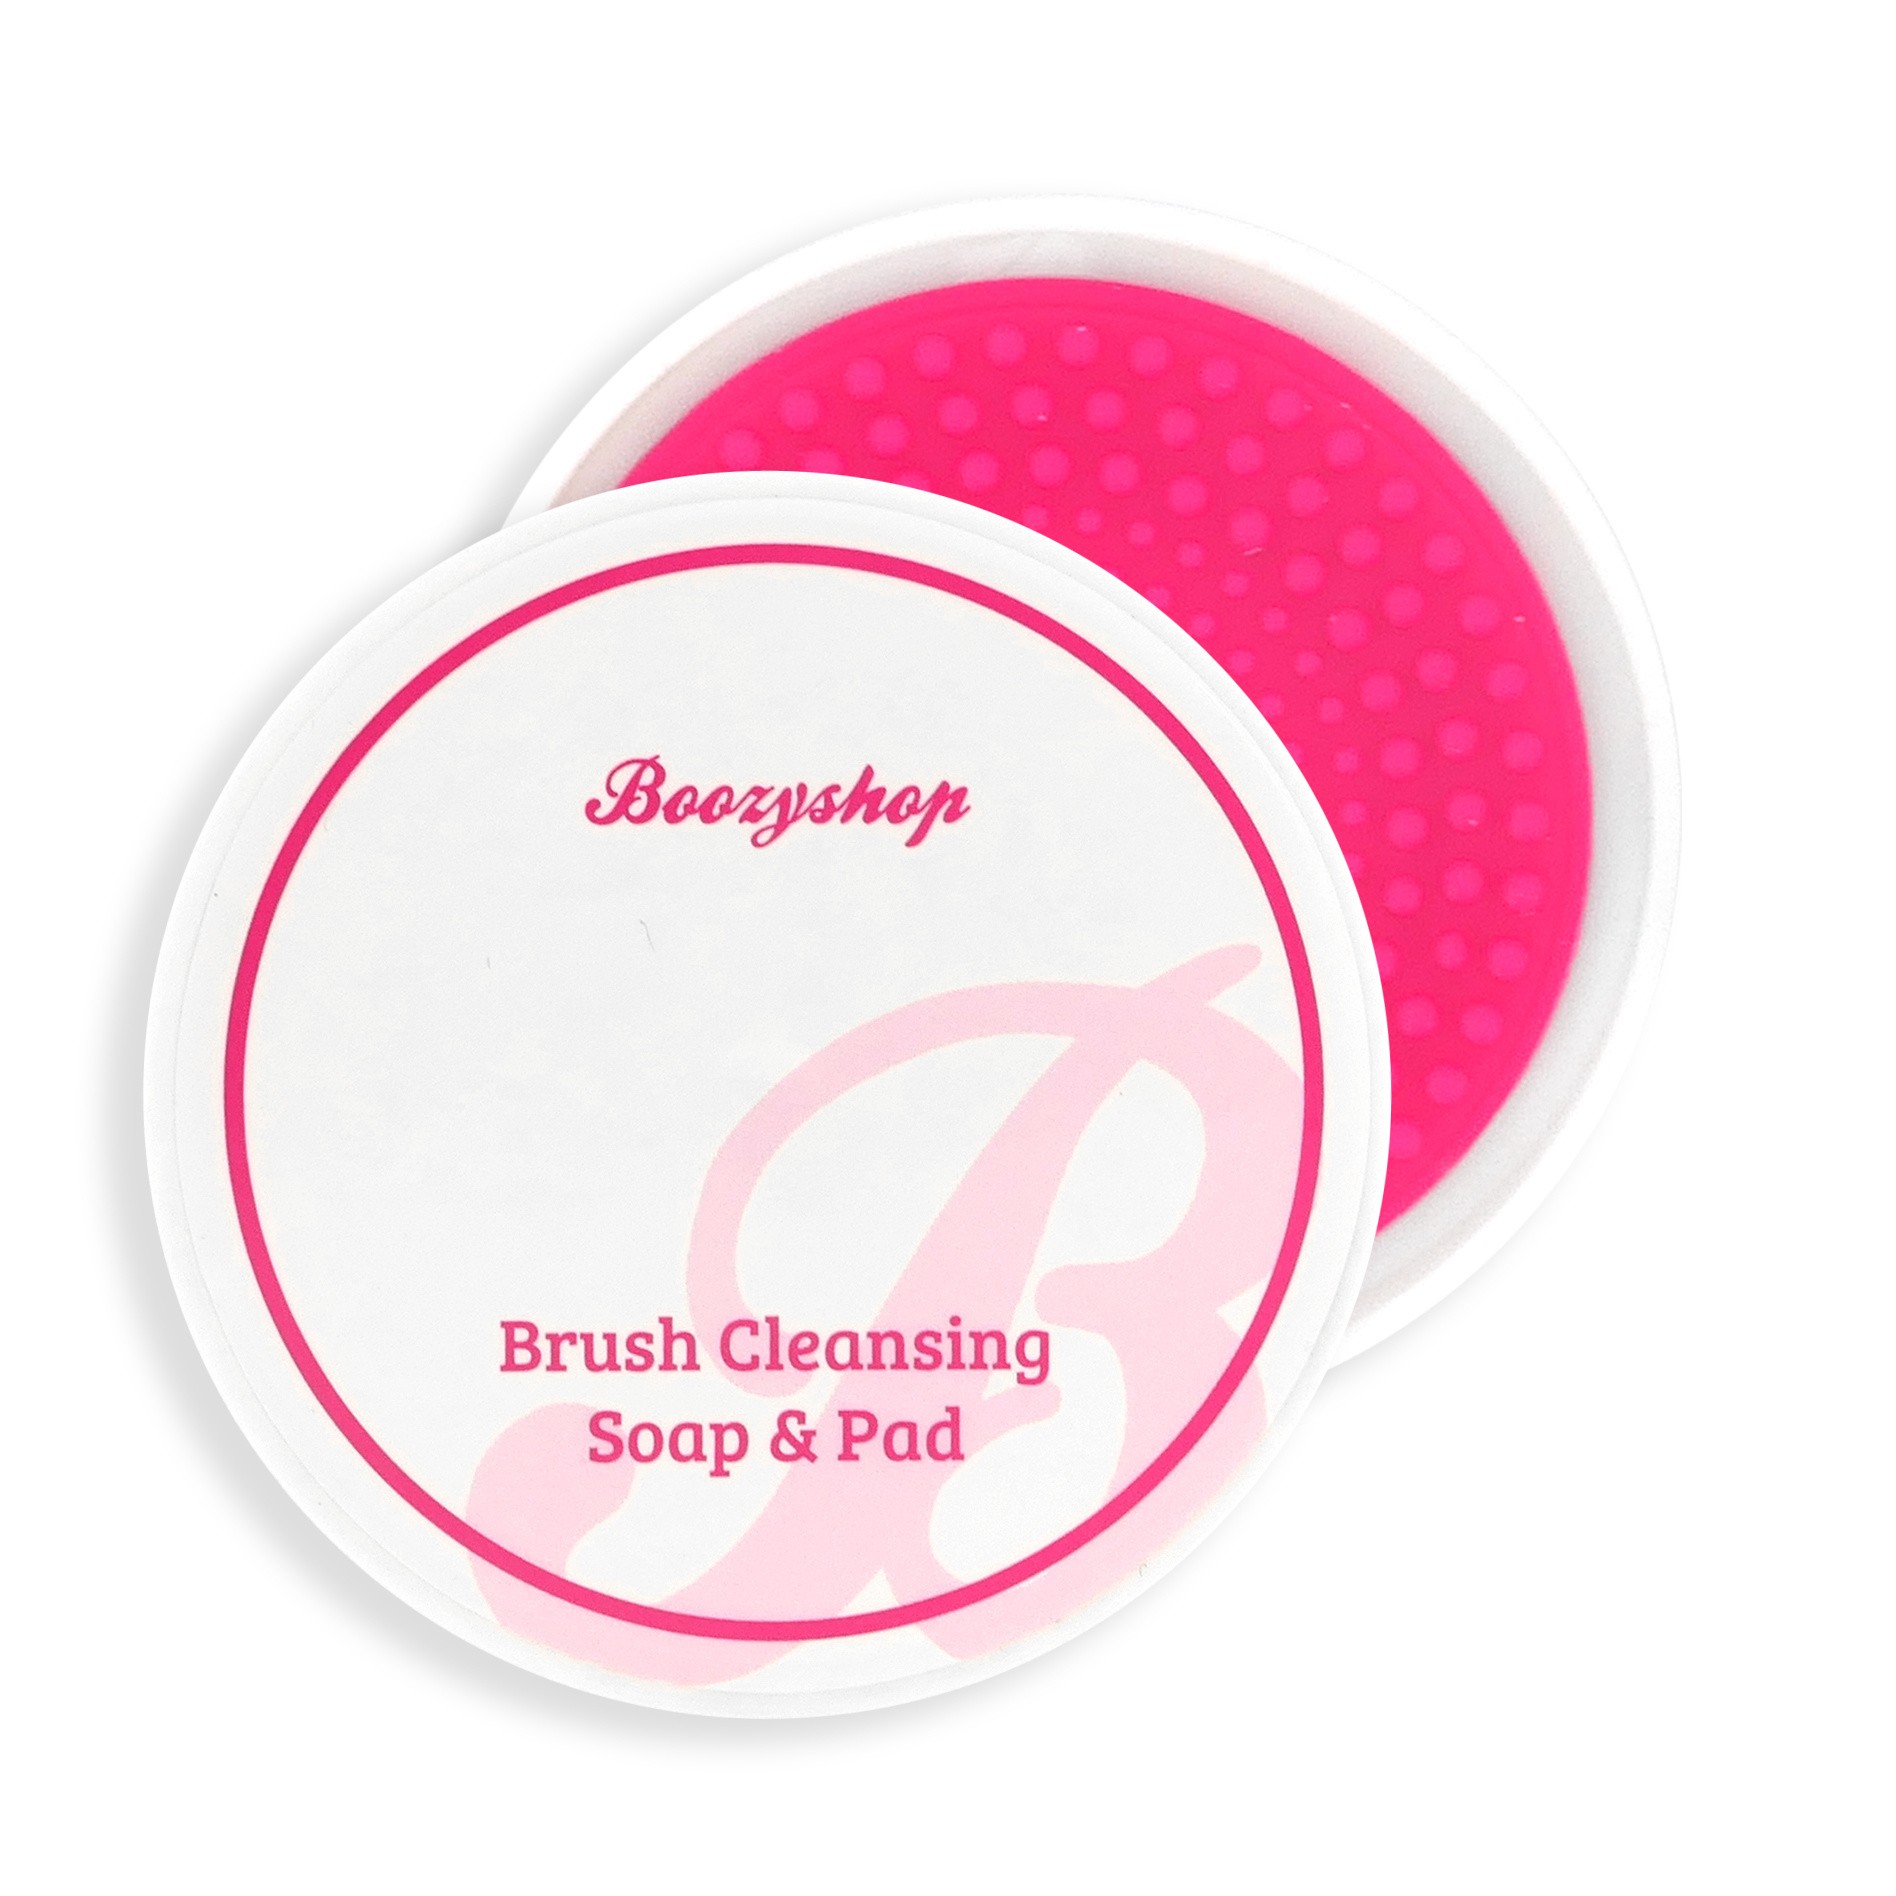 Brush Cleansing Soap & Pad